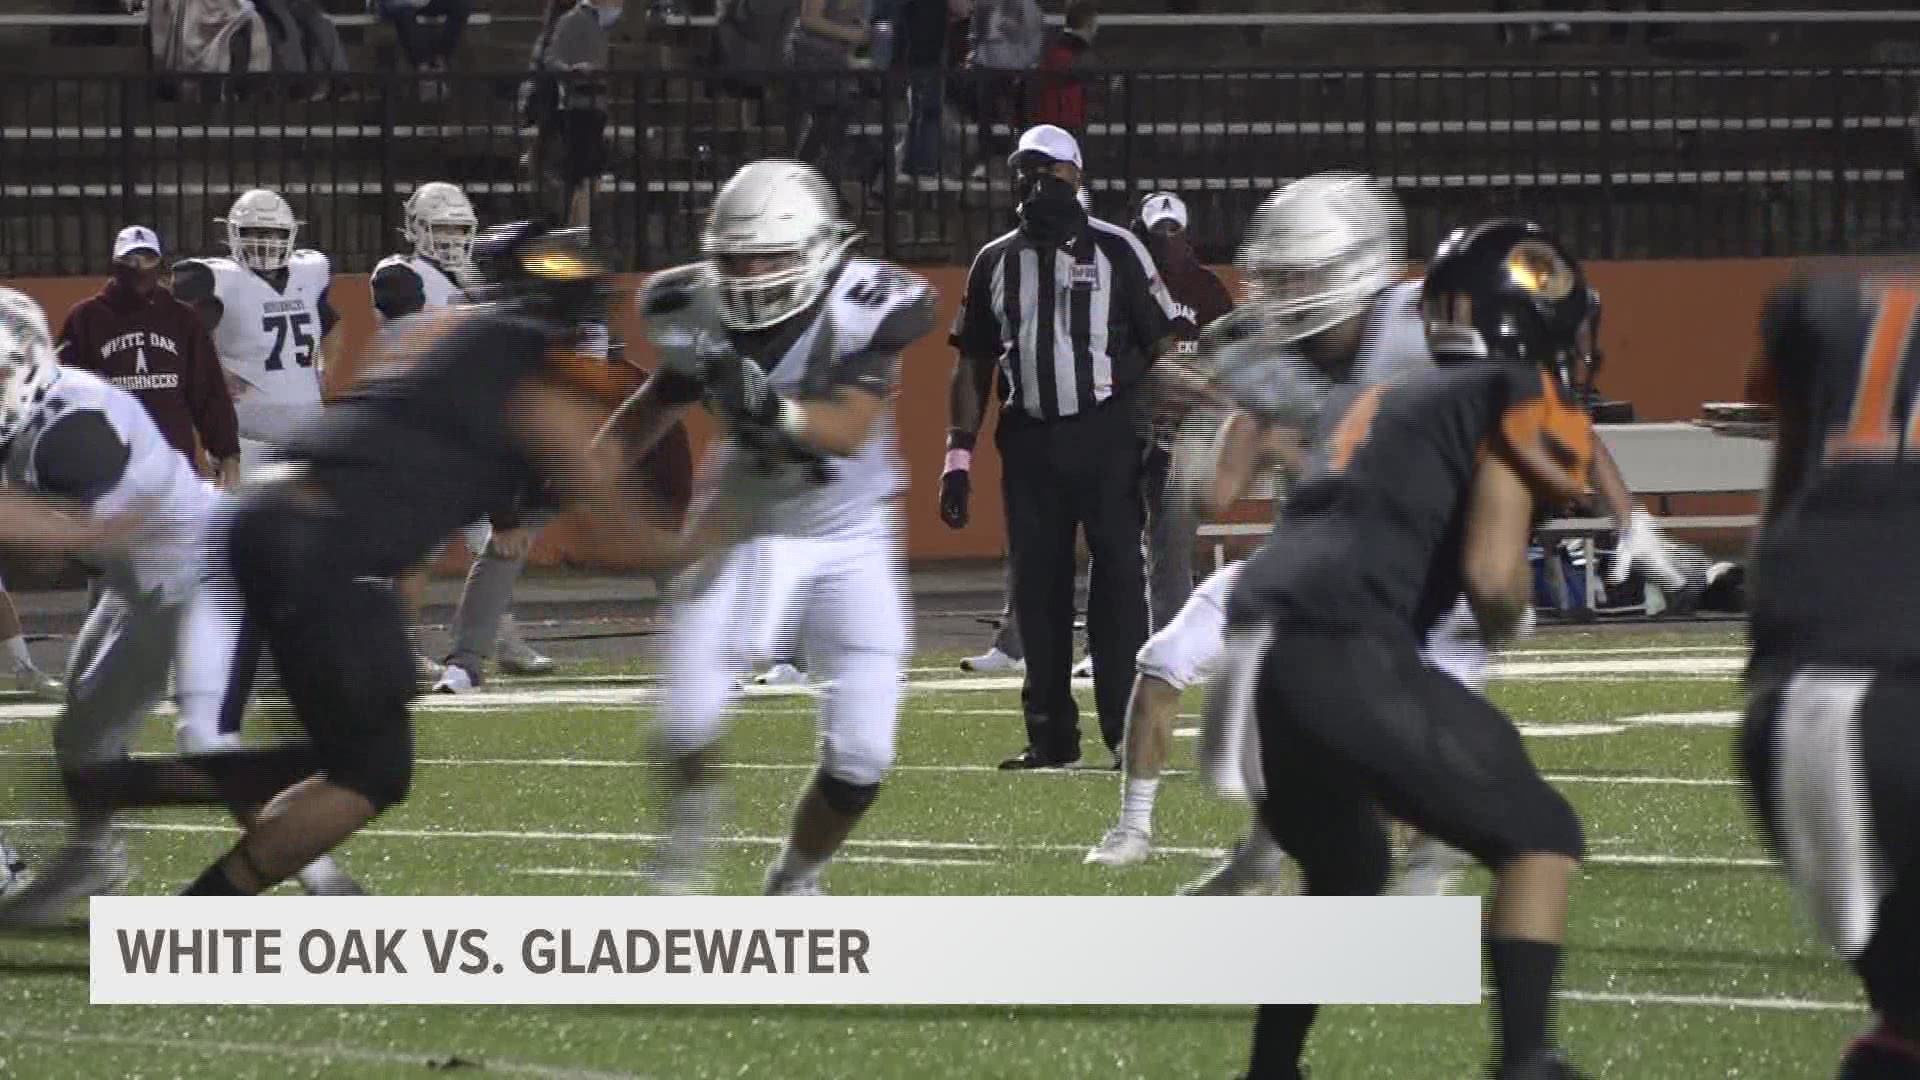 Gladewater came away with the win, topping White Oak 31-14.